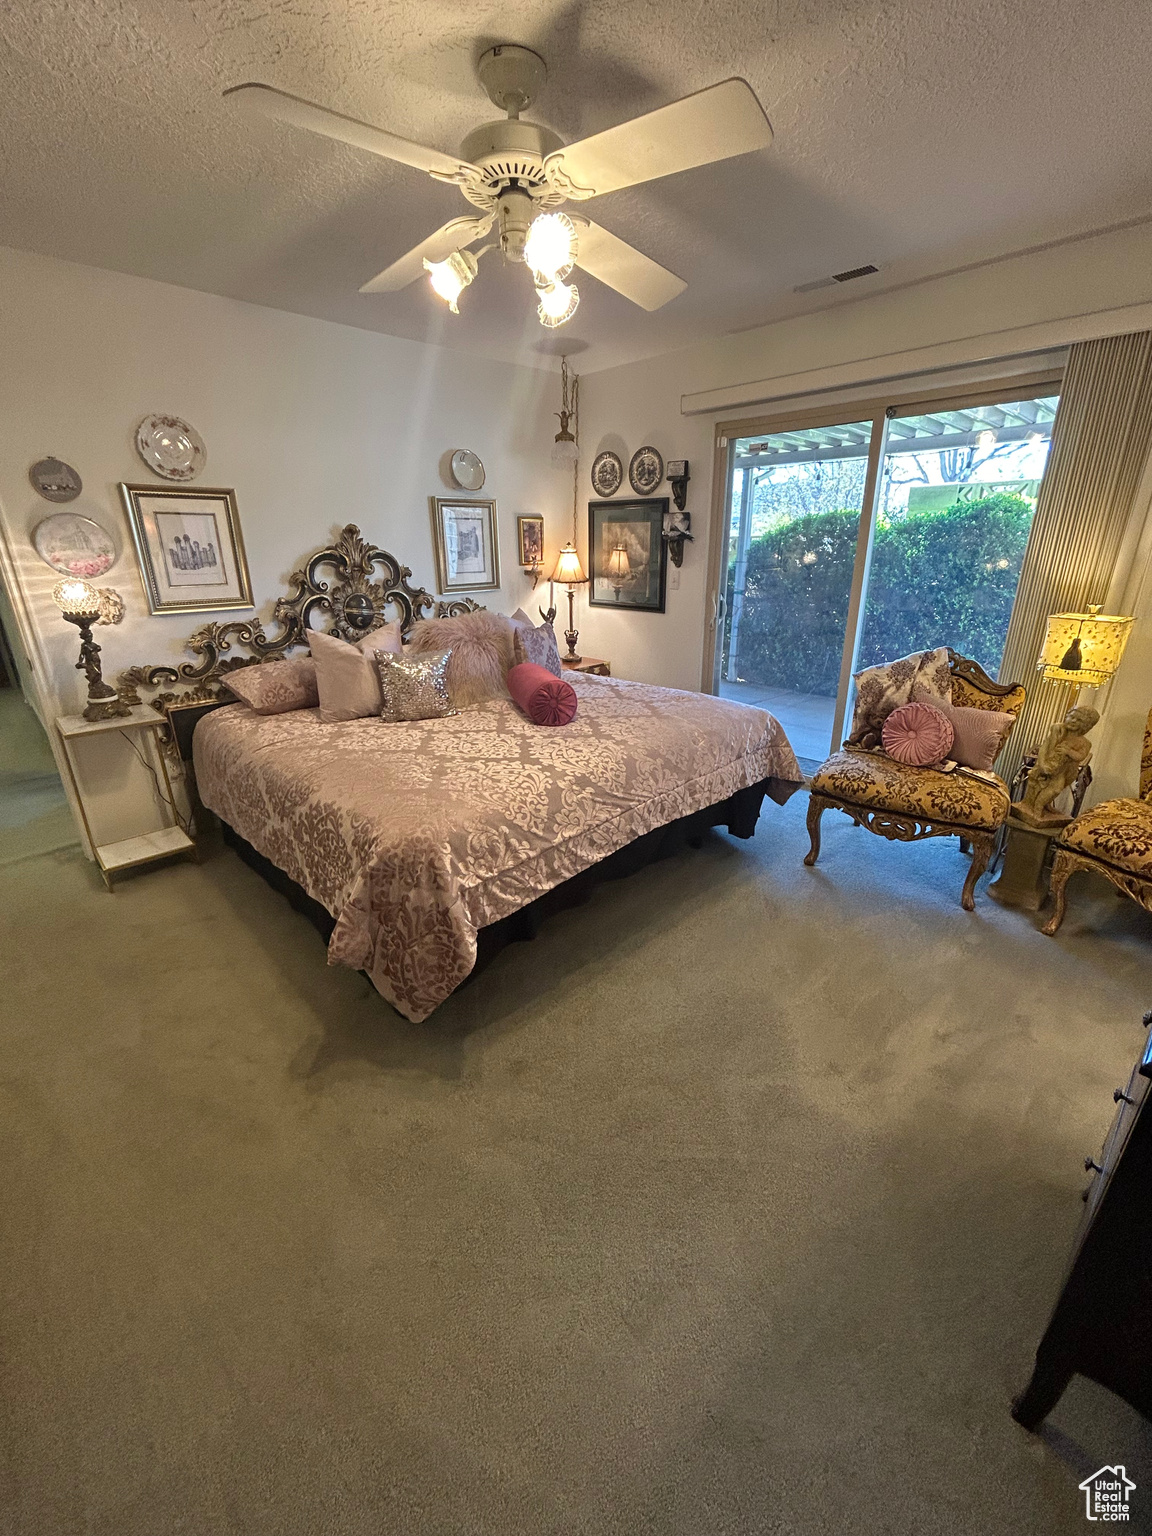 Carpeted bedroom featuring ceiling fan, access to exterior, and a textured ceiling